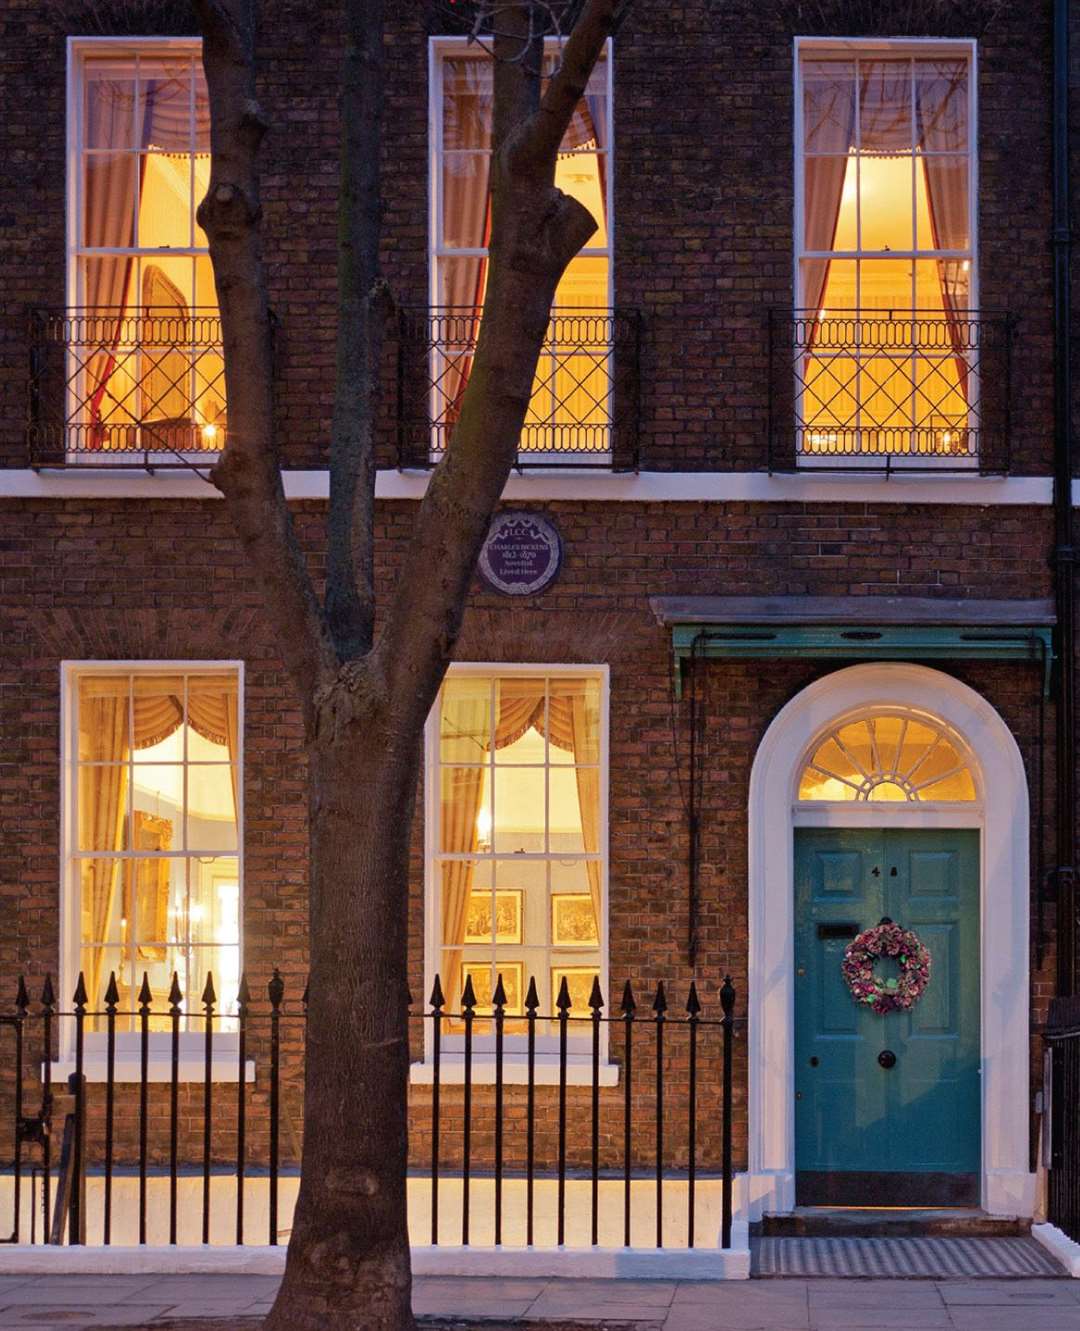 The Dickens Museum in London